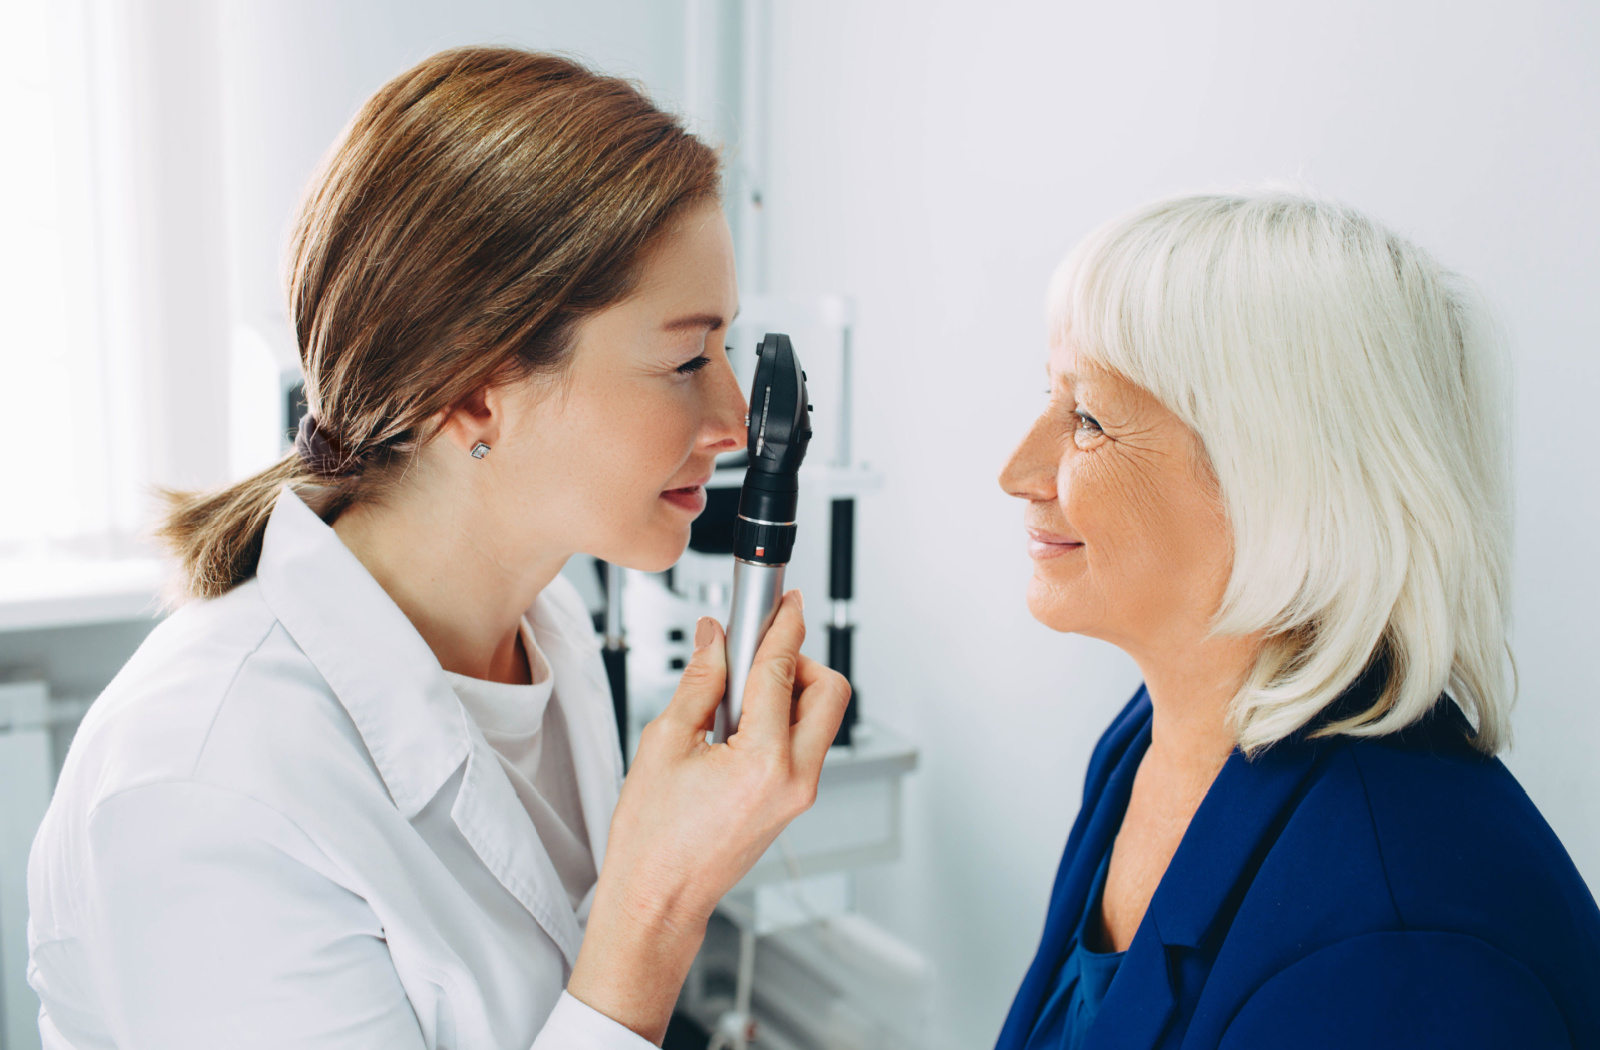 A female optometrist examines a female patient's eyes